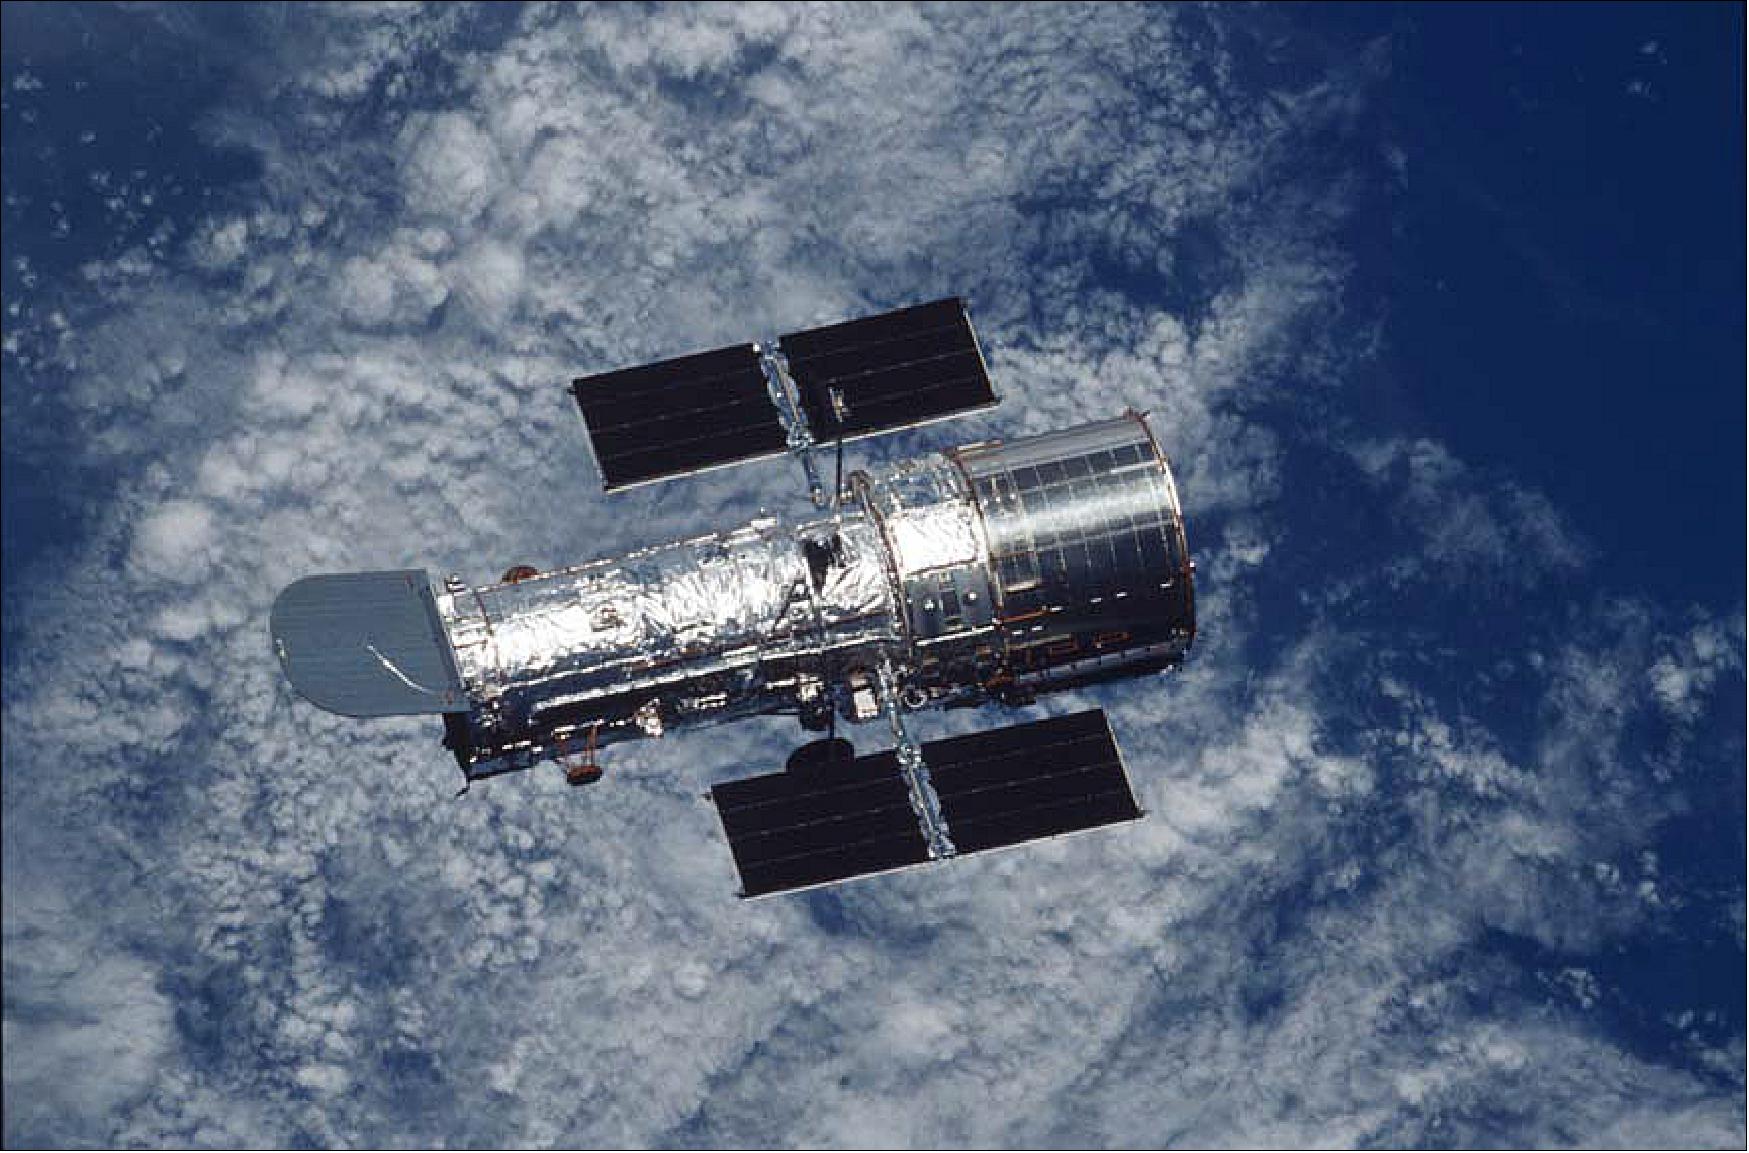 Figure 61: The Hubble Space Telescope (HST) heads back toward its normal routine, after a week of servicing and upgrading by the STS‐109 astronaut crew in 2002 (image credit: NASA, Ref. 93)